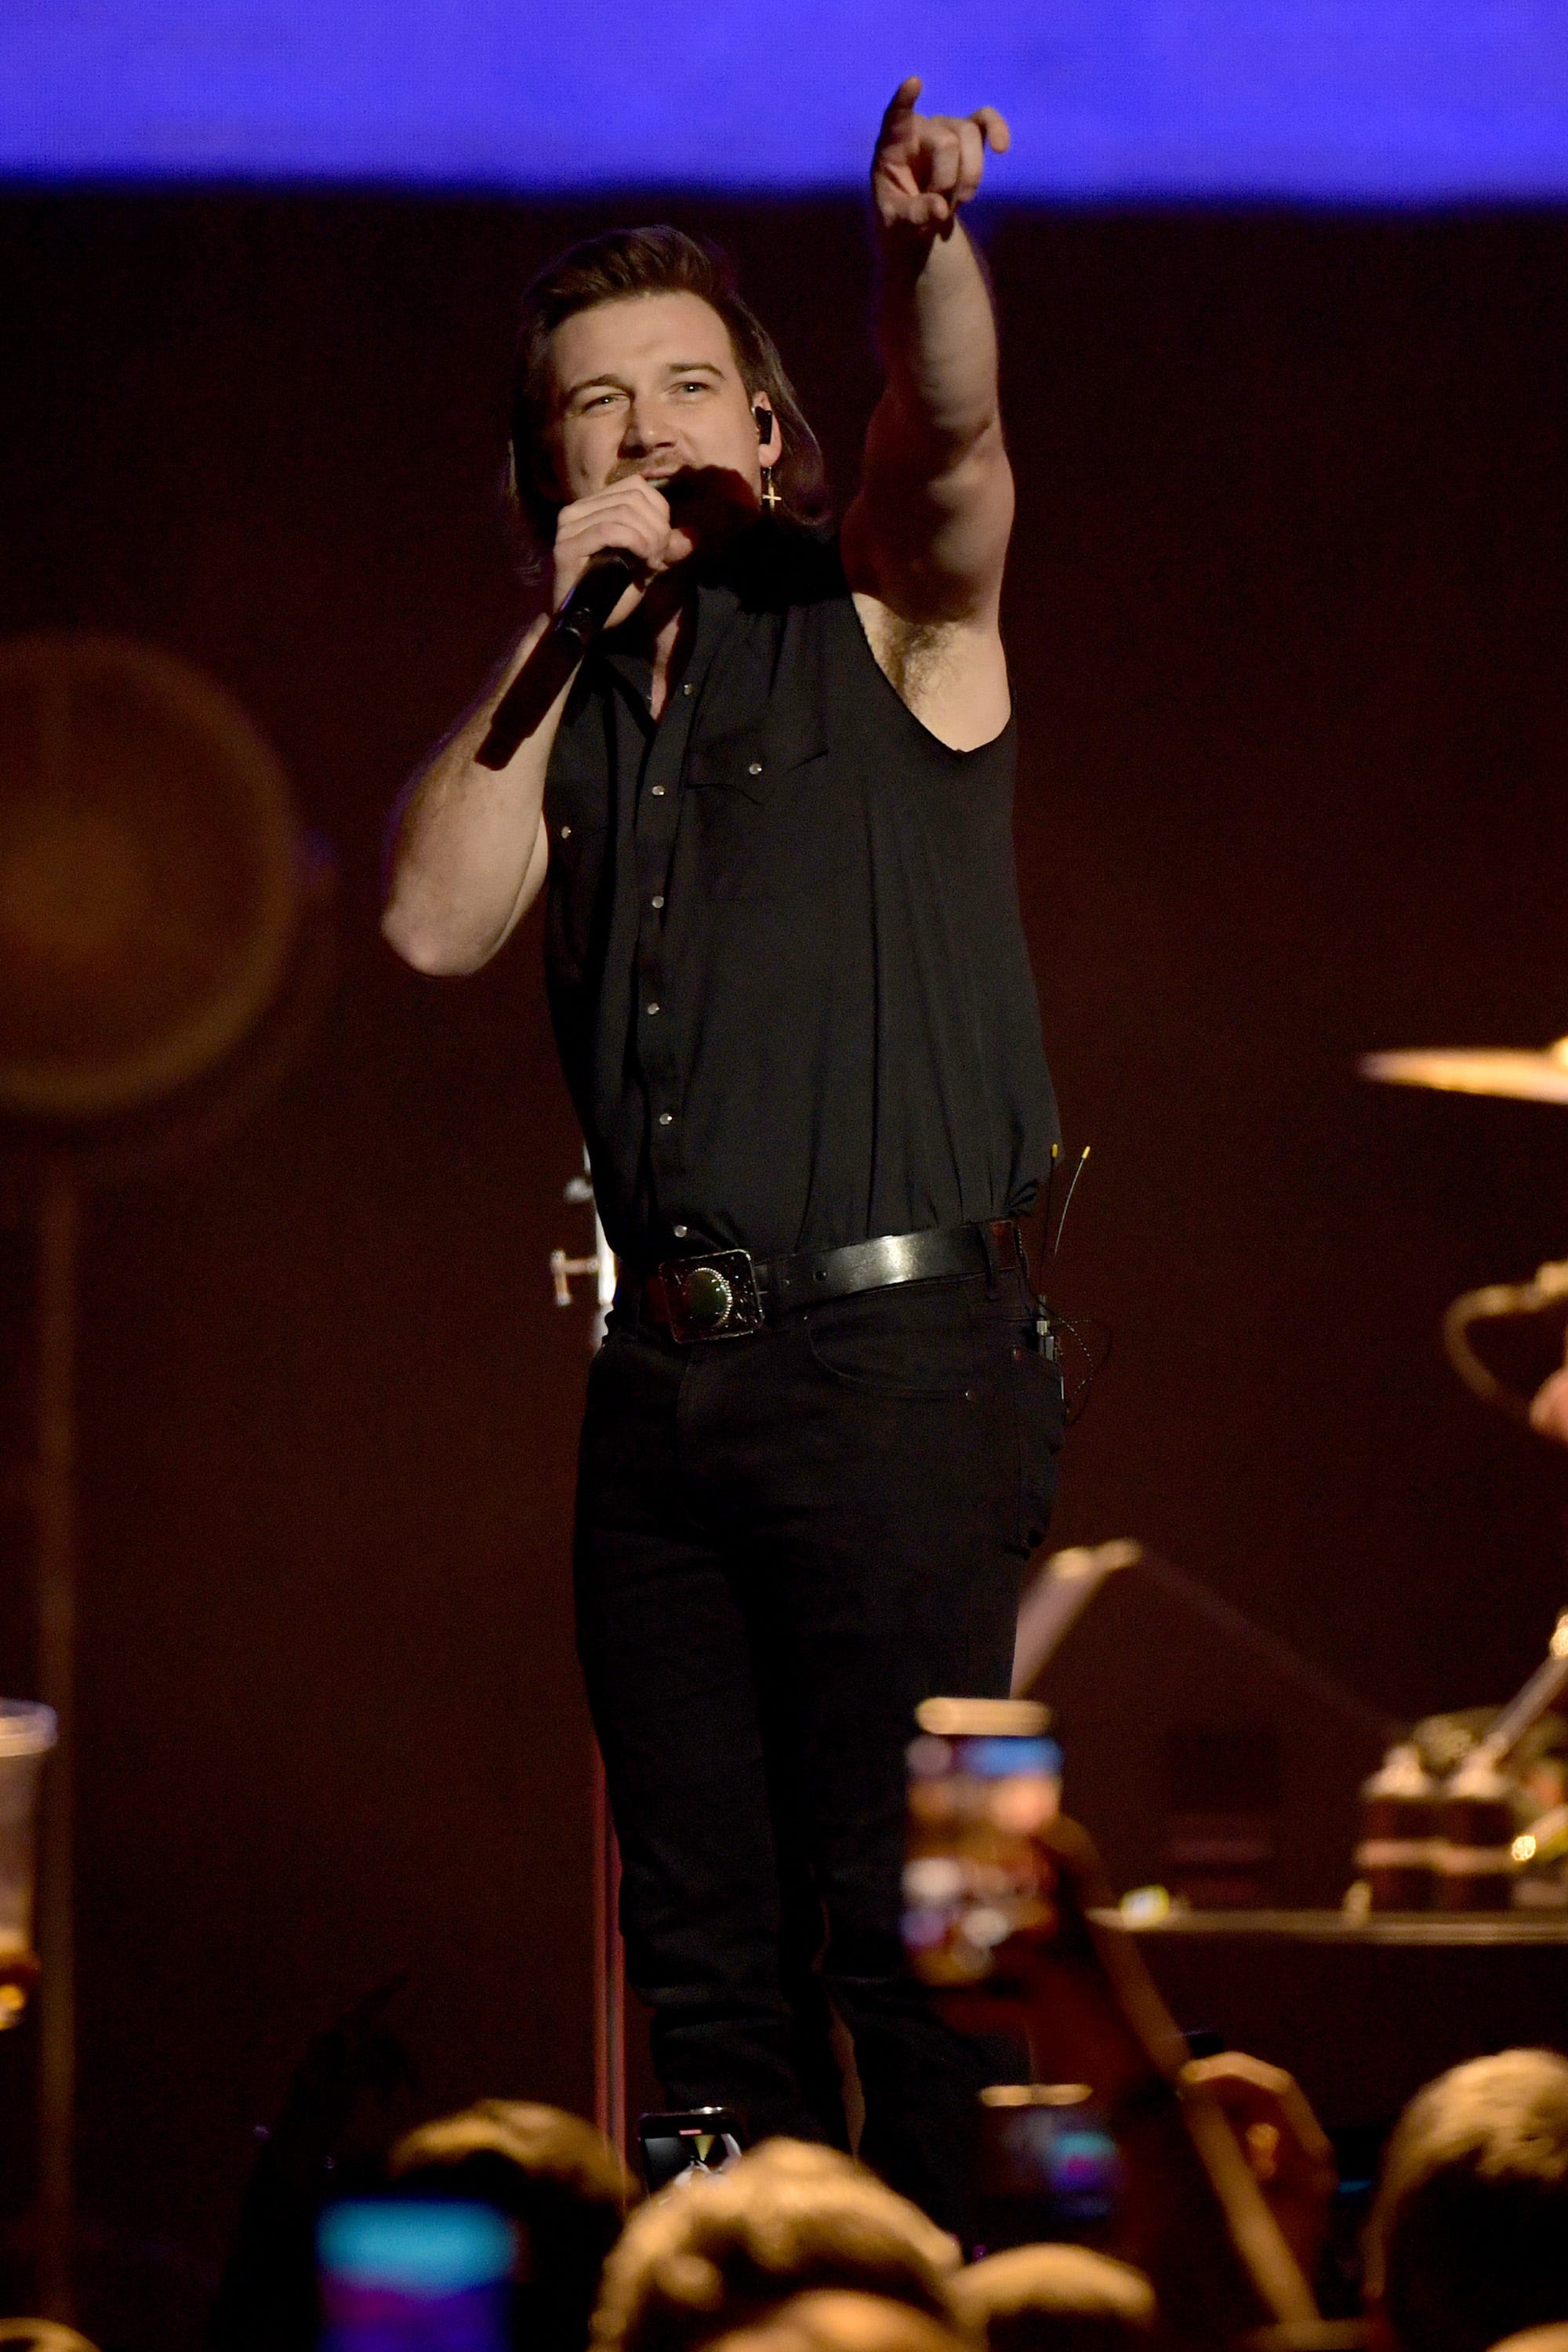 Morgan Wallen performs at All for the Hall: Under the Influence Benefiting the Country Music Hall of Fame and Museum at Bridgestone Arena in Nashville, Tennessee, on Feb. 10, 2020.